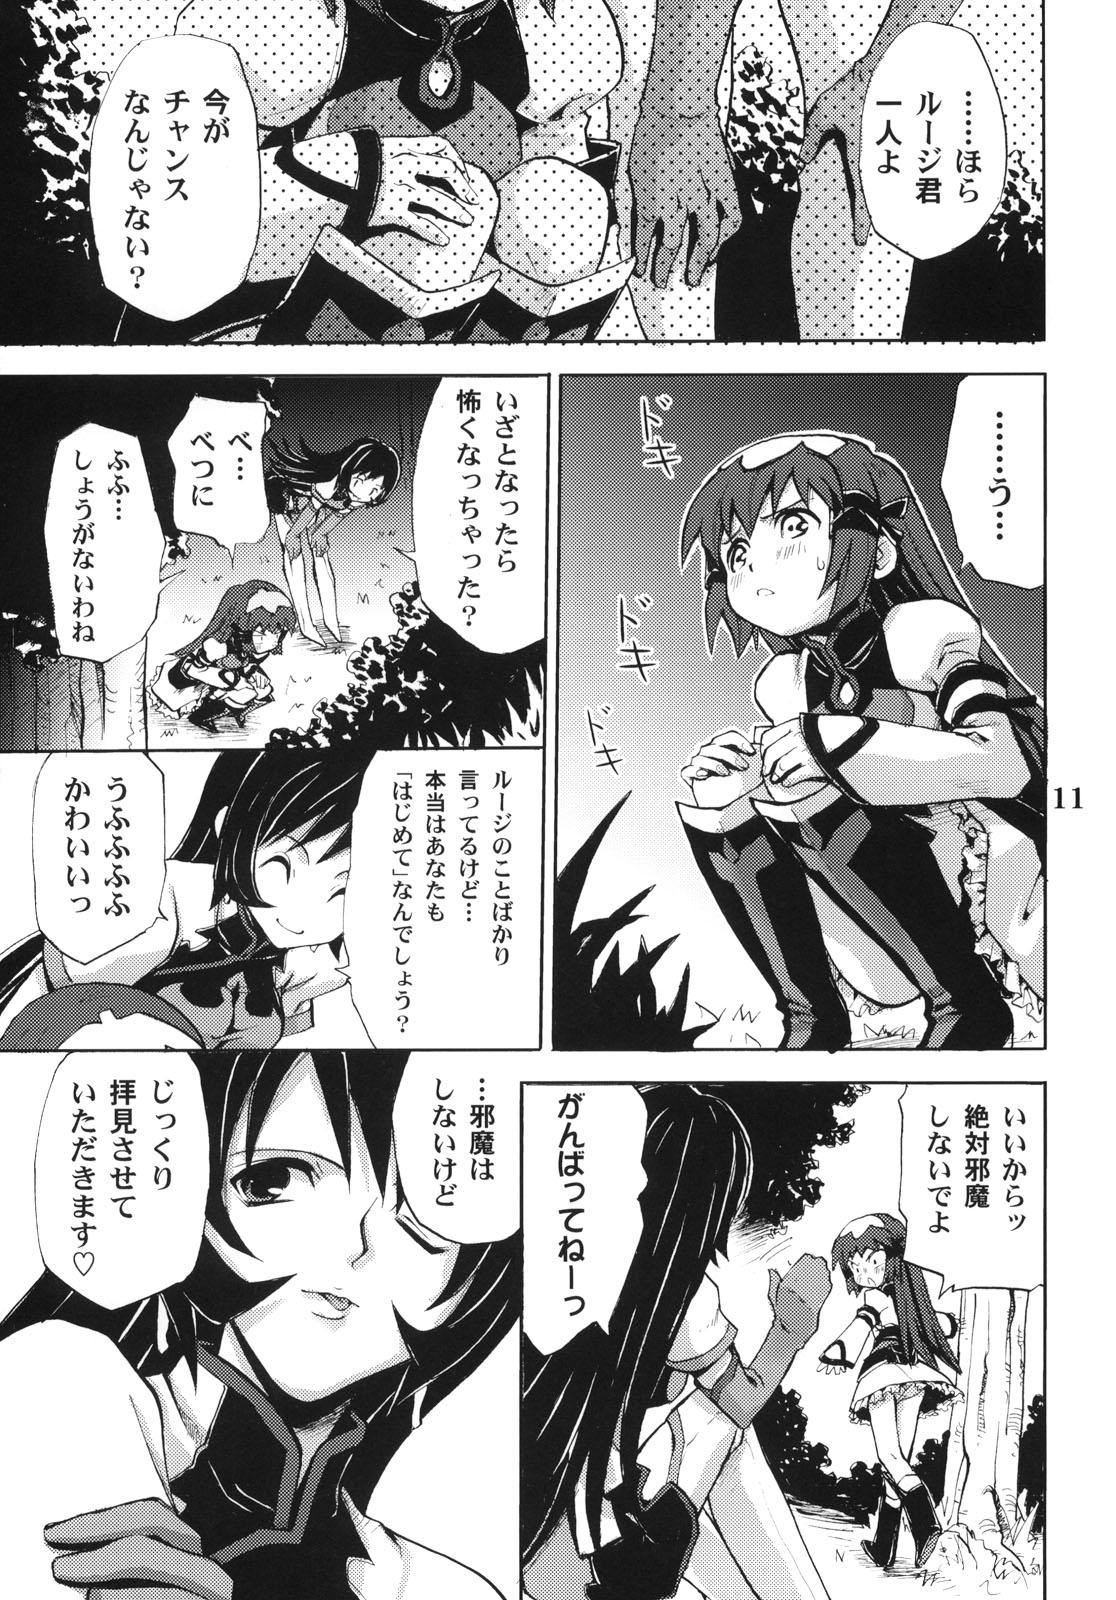 Hot Girl Answers in Genesis - Zoids genesis Lolicon - Page 10